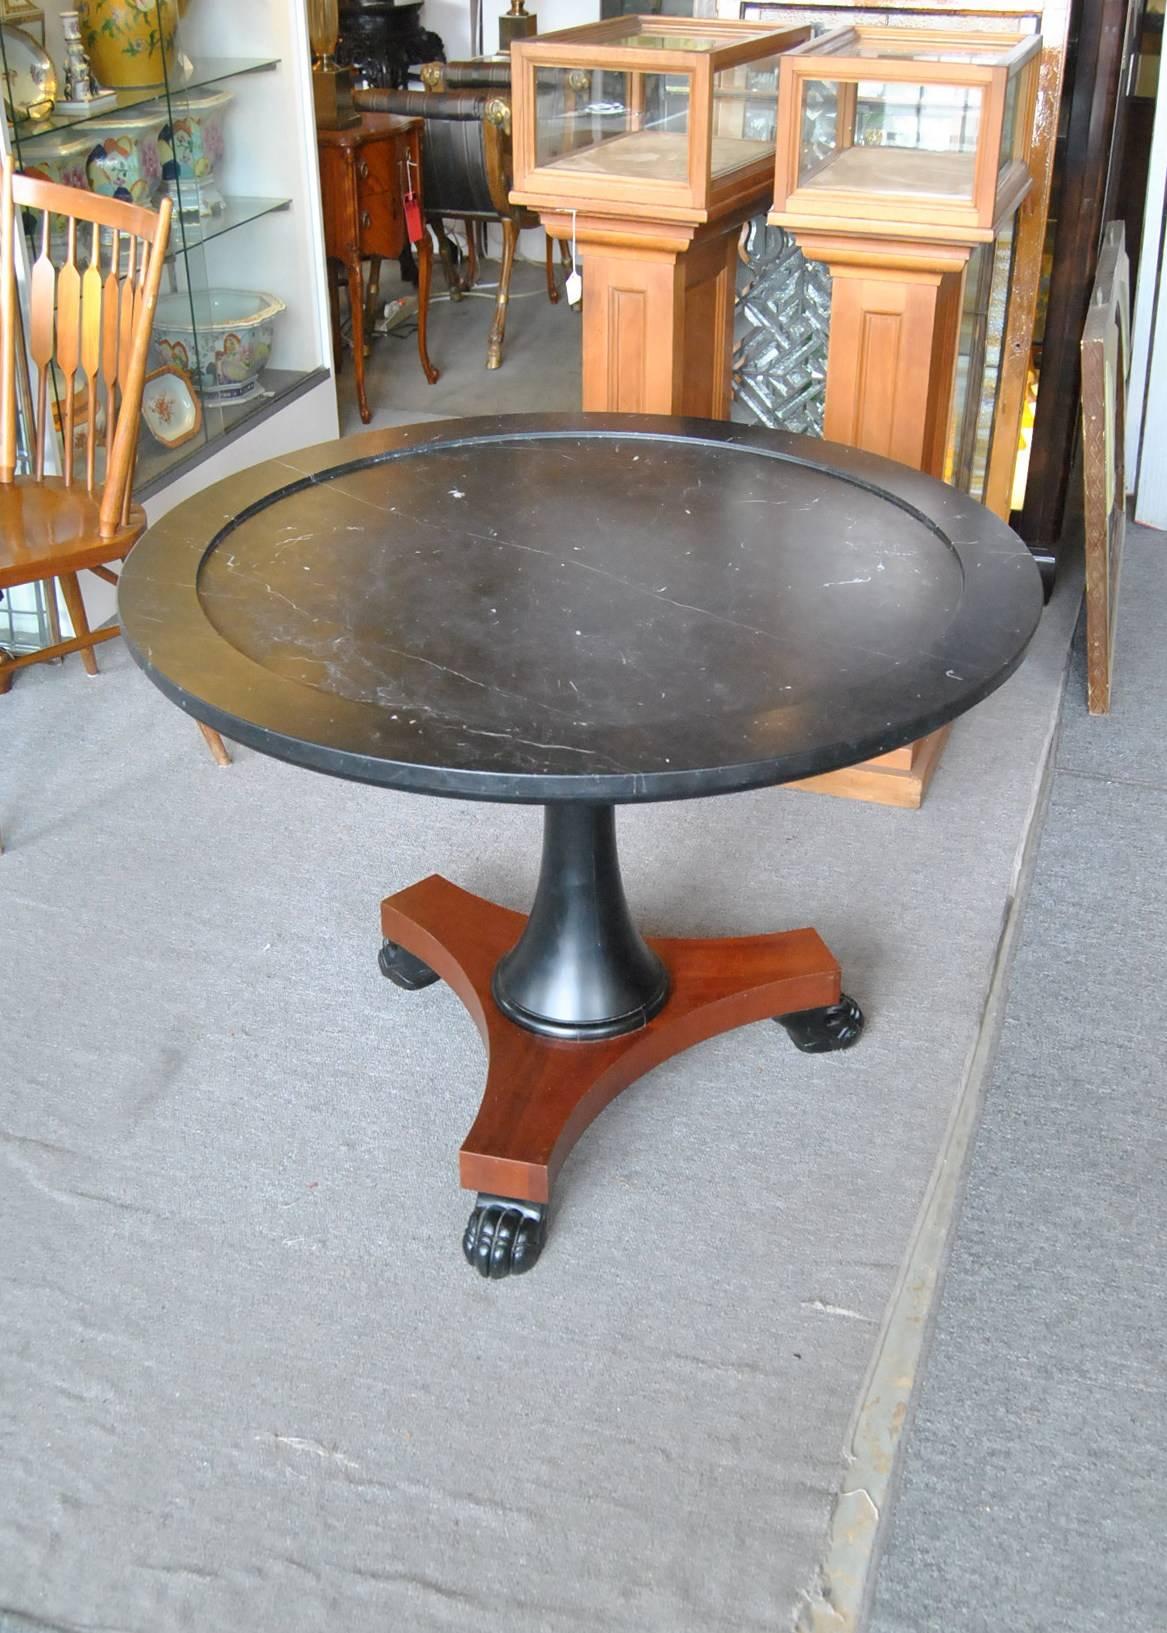 An impressive Empire style round centre table by Ralph Lauren. It features a black marble top and a mahogany base with carved claw feet. This comes with an adapter to add 1 1/2